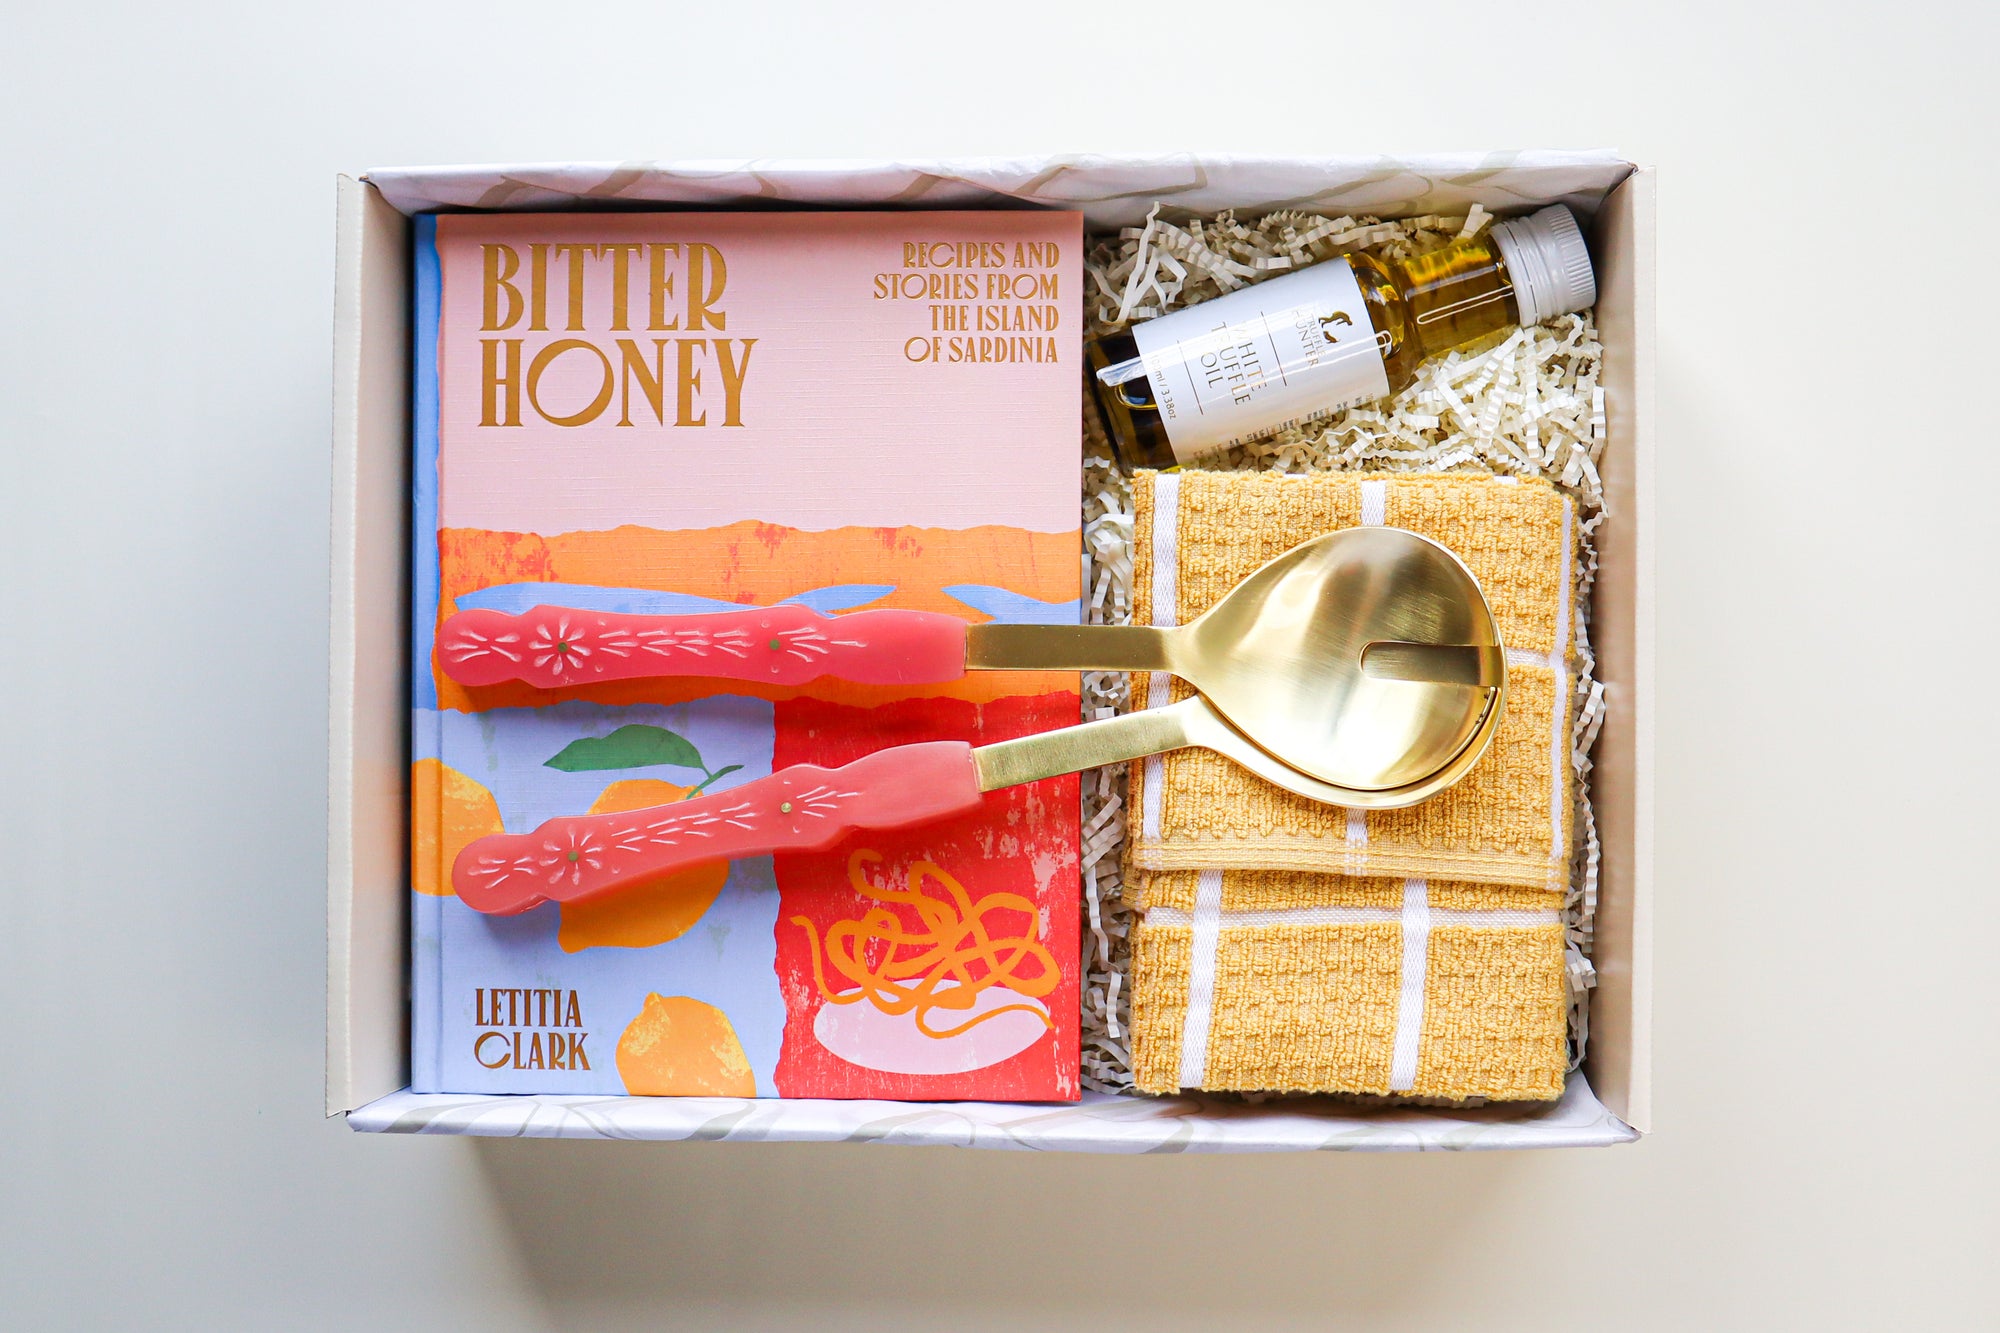 A beige coloured gift box containing a bright hard cover cook book titled Bitter Honey, Gold and Pink Salad Servers, a small bottle of White Truffle Oil and a yellow and white striped tea towel